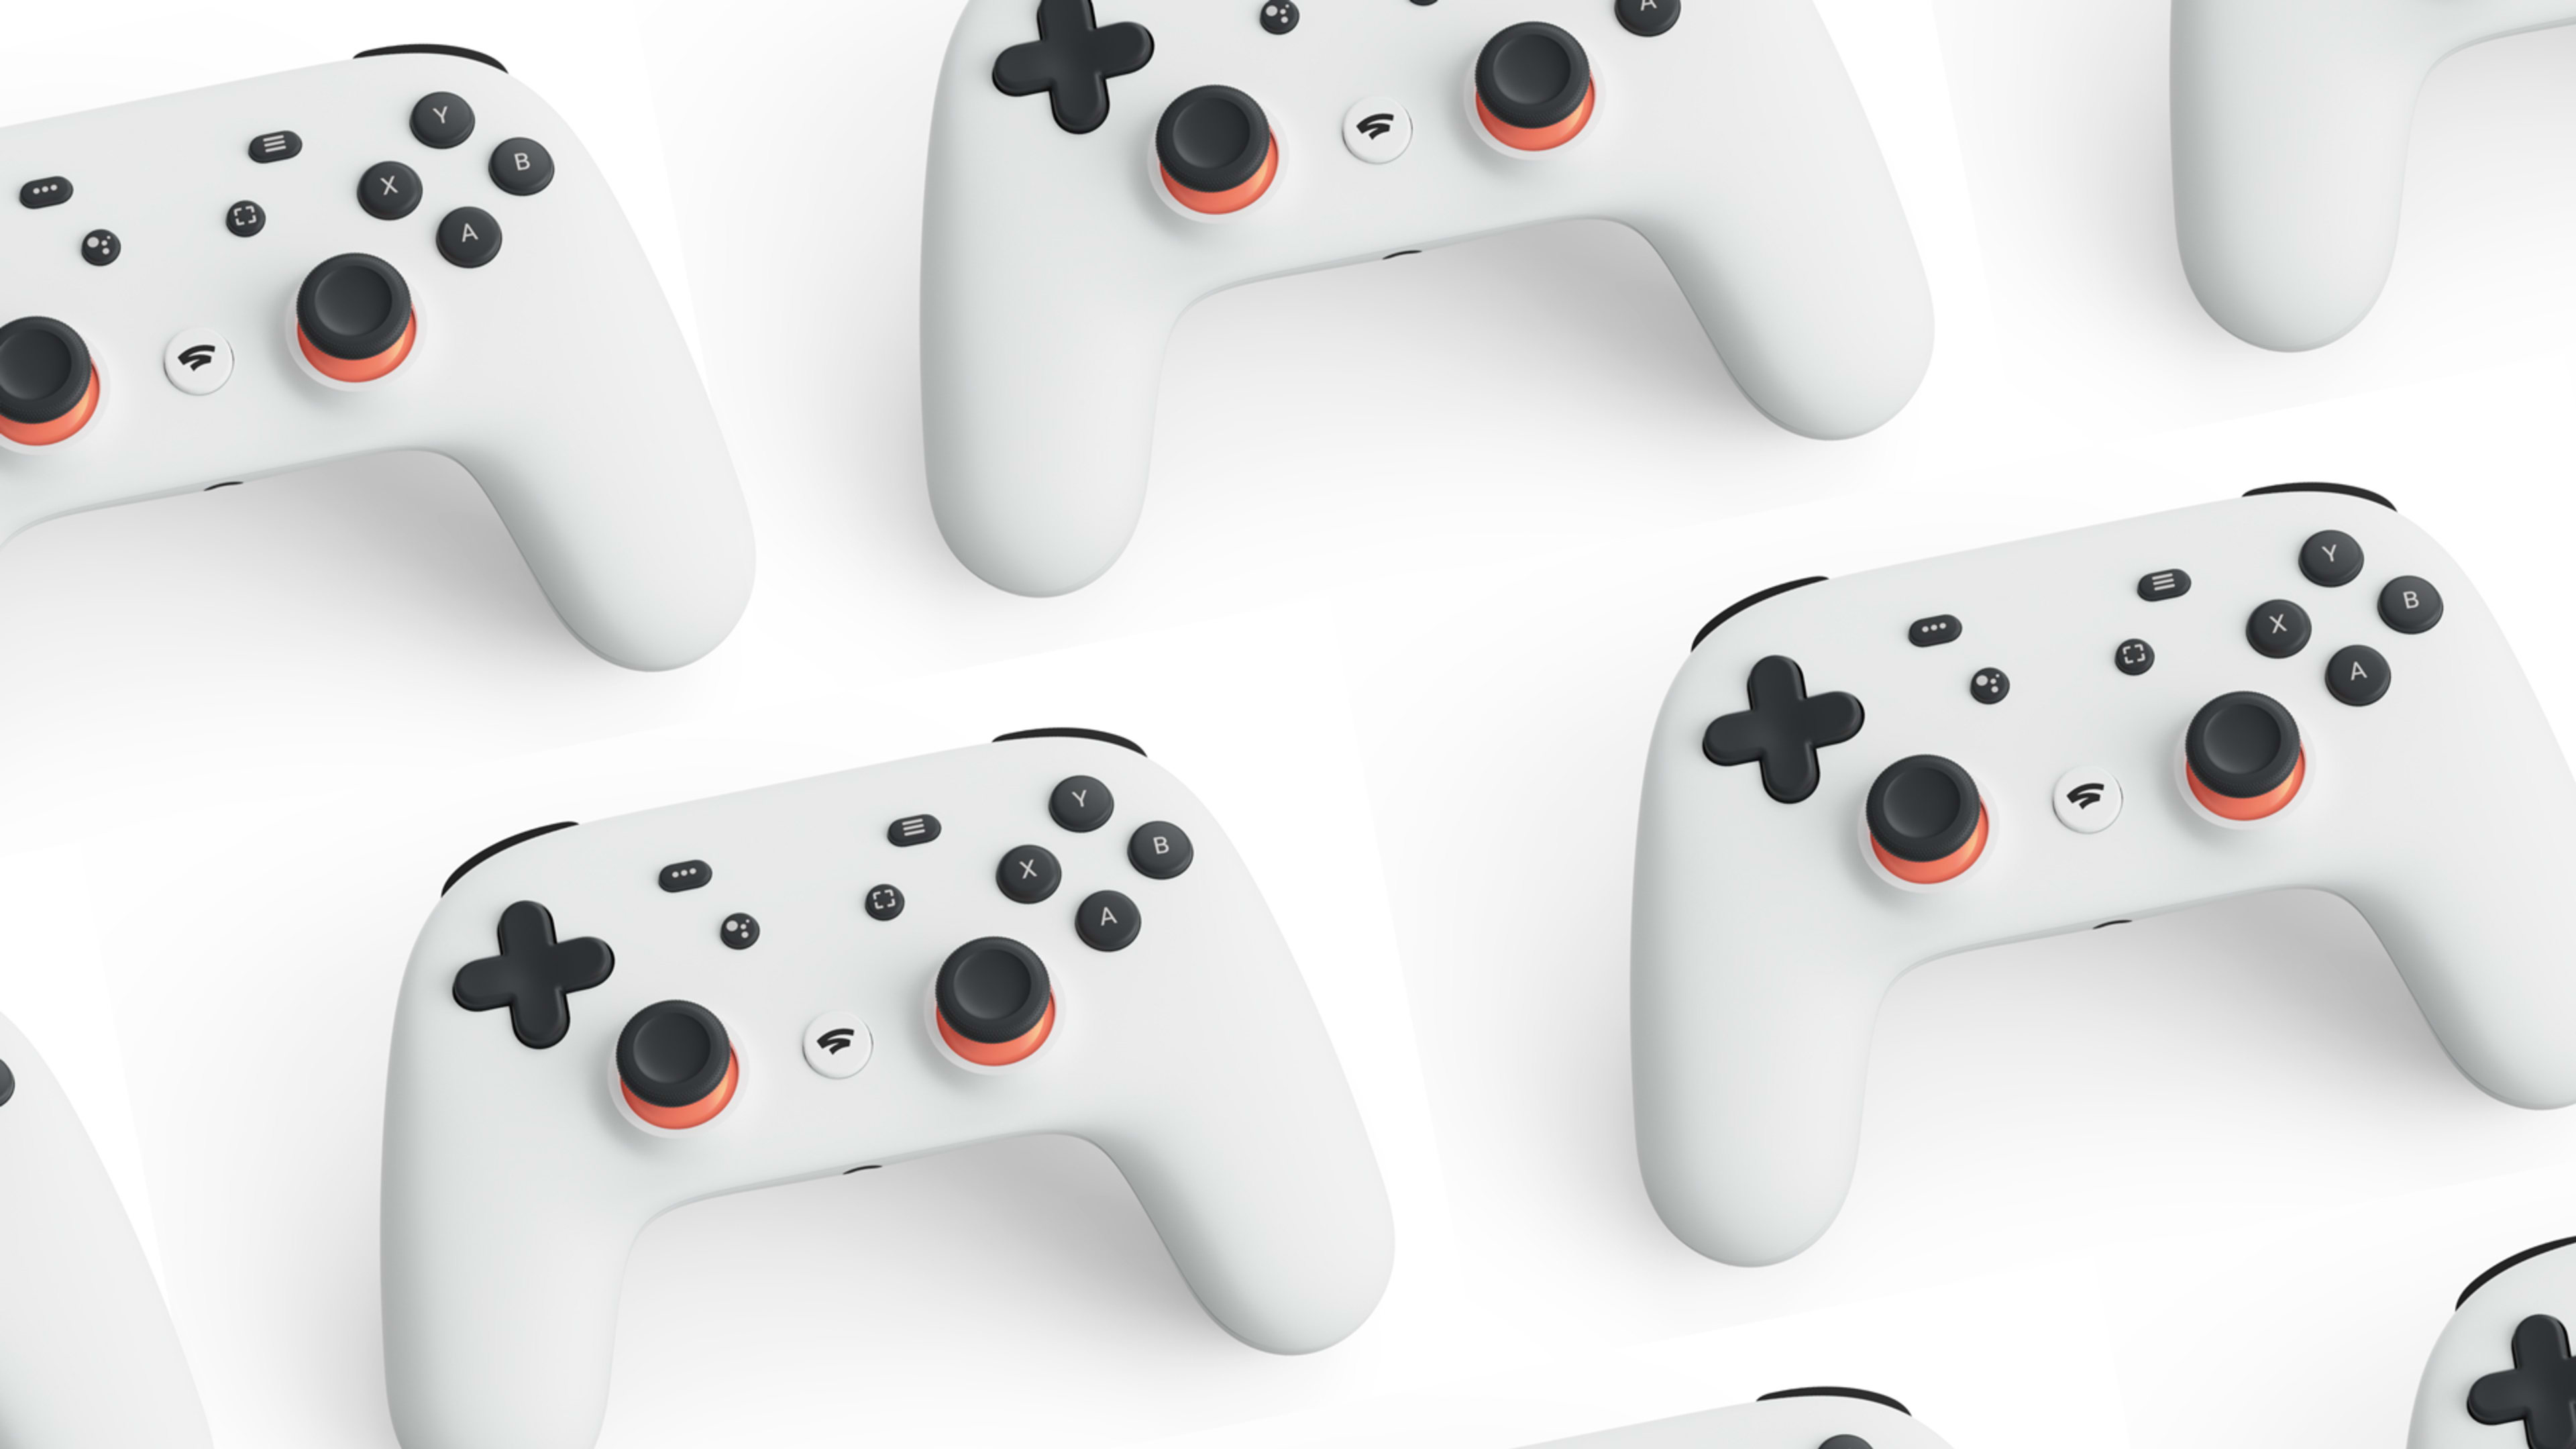 Google Stadia will take on game consoles and PCs in 2019, but many questions remain